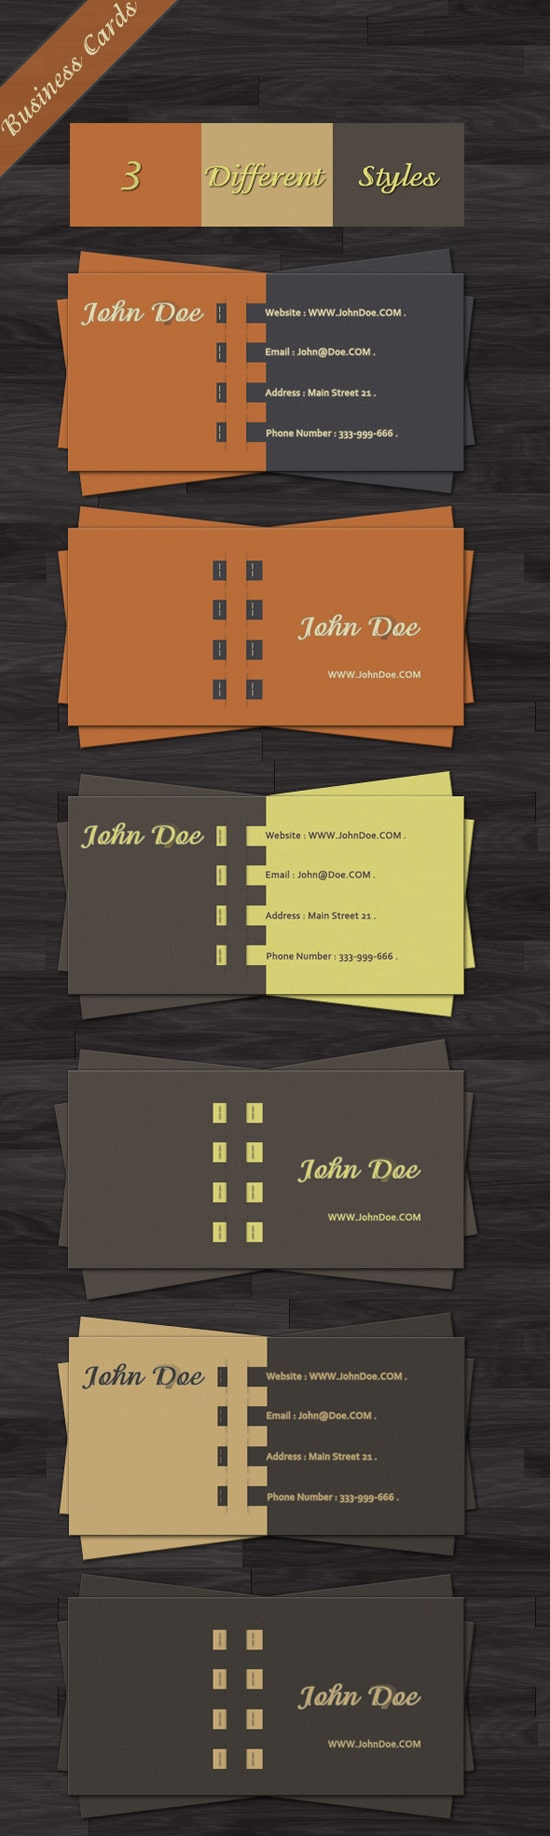 100 Free Business Card Templates – Designrfix Within Business Card Template Photoshop Cs6